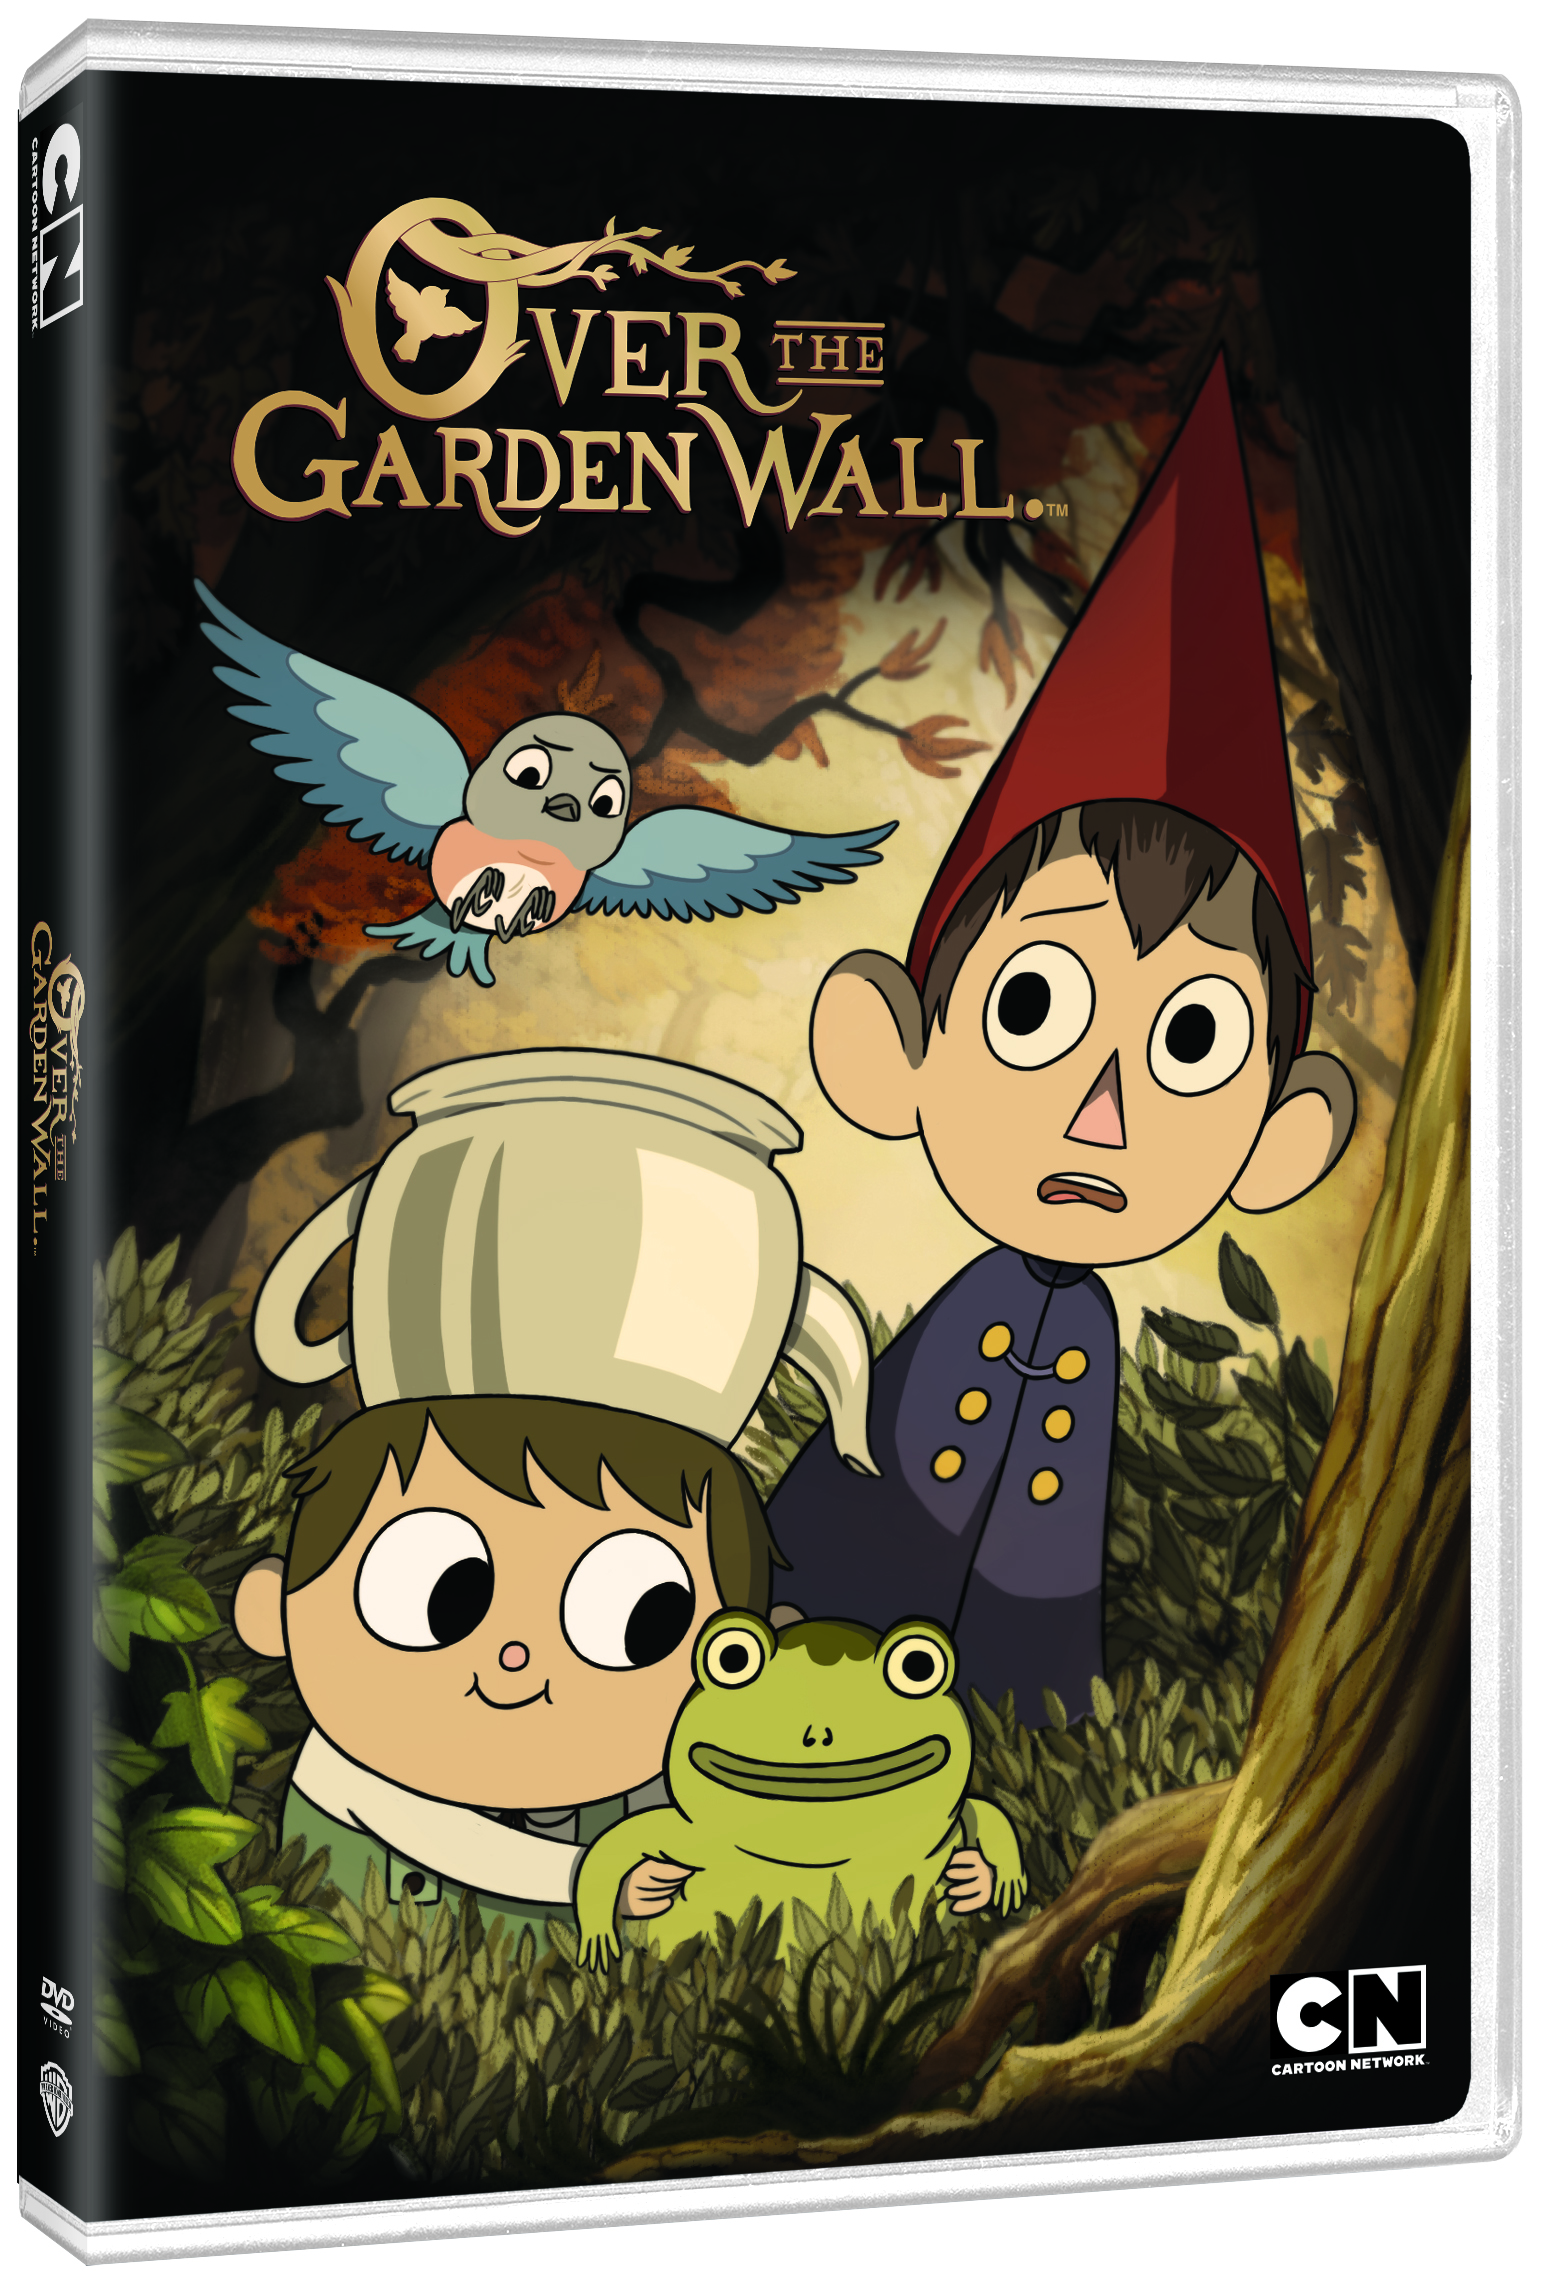 Exclusive: Woo Your High School Sweetheart with Wirt's Over the Garden Wall  Poetry Cassette - Paste